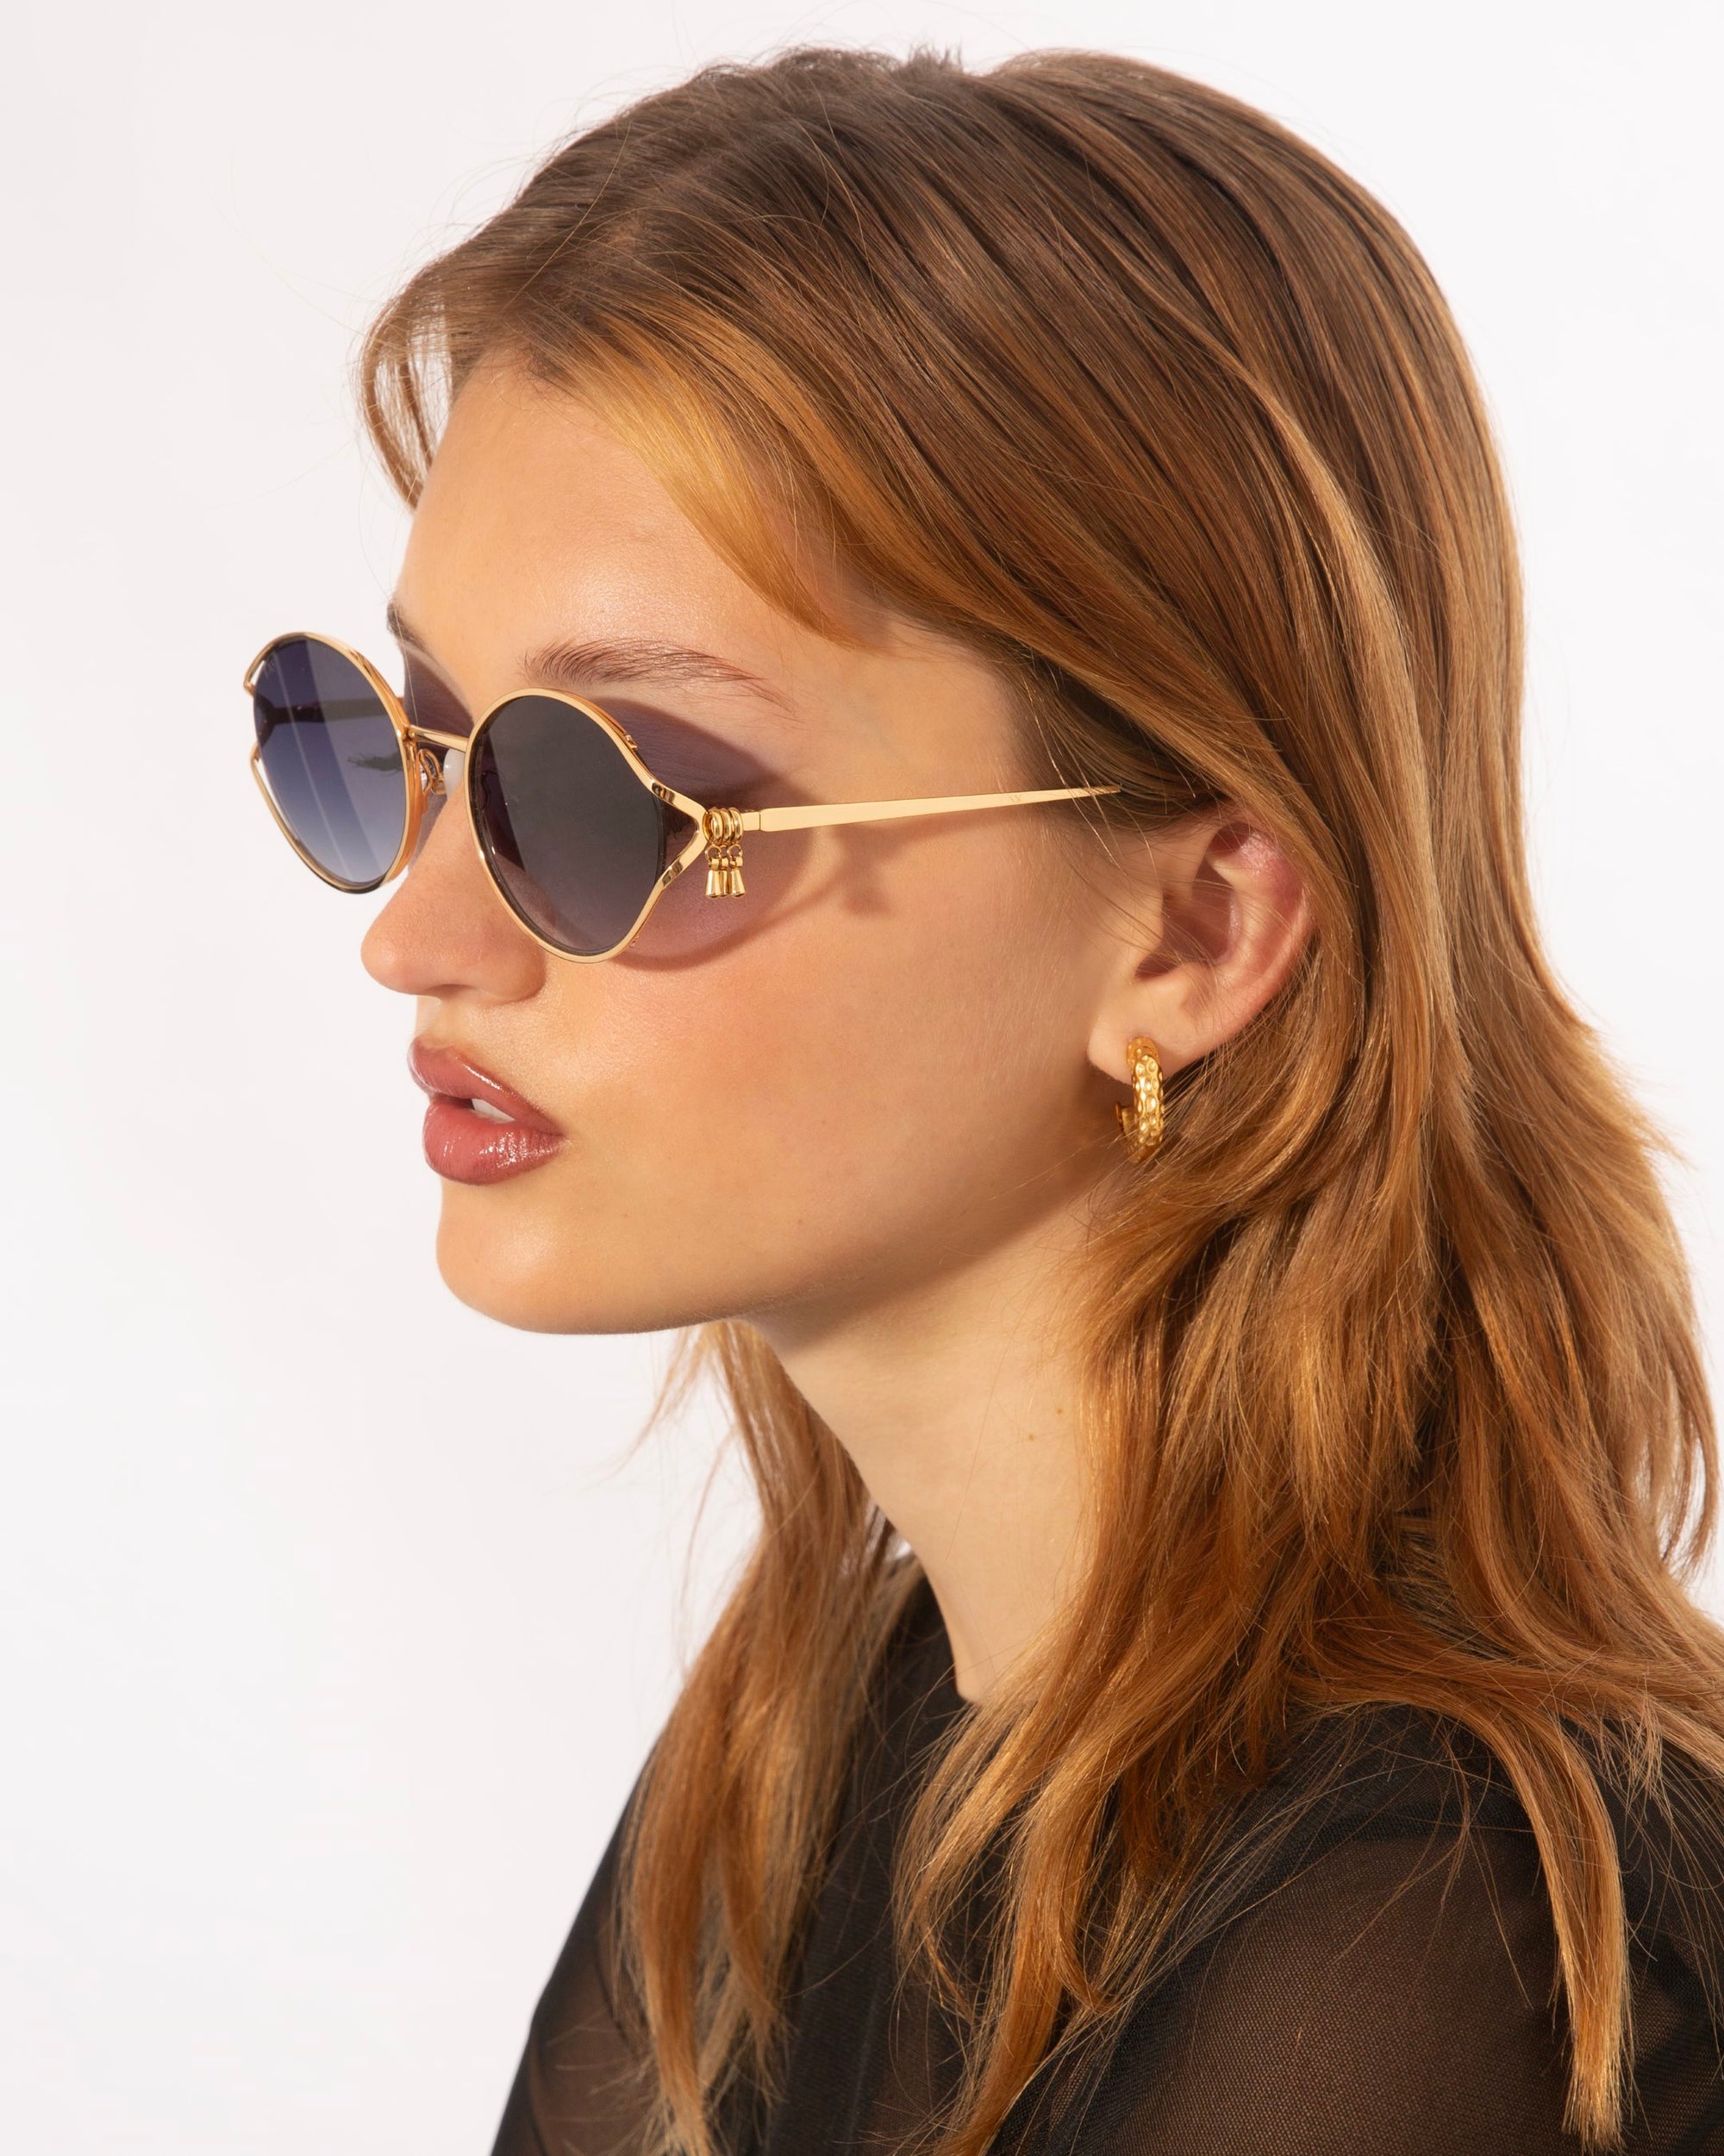 A young person with long, light brown hair is wearing round, dark For Art's Sake® Sky sunglasses adorned with jade-stone nose pads and small hoop earrings with 18-karat gold plating. They are looking off to the side, and their lips are slightly parted. The background is plain white.